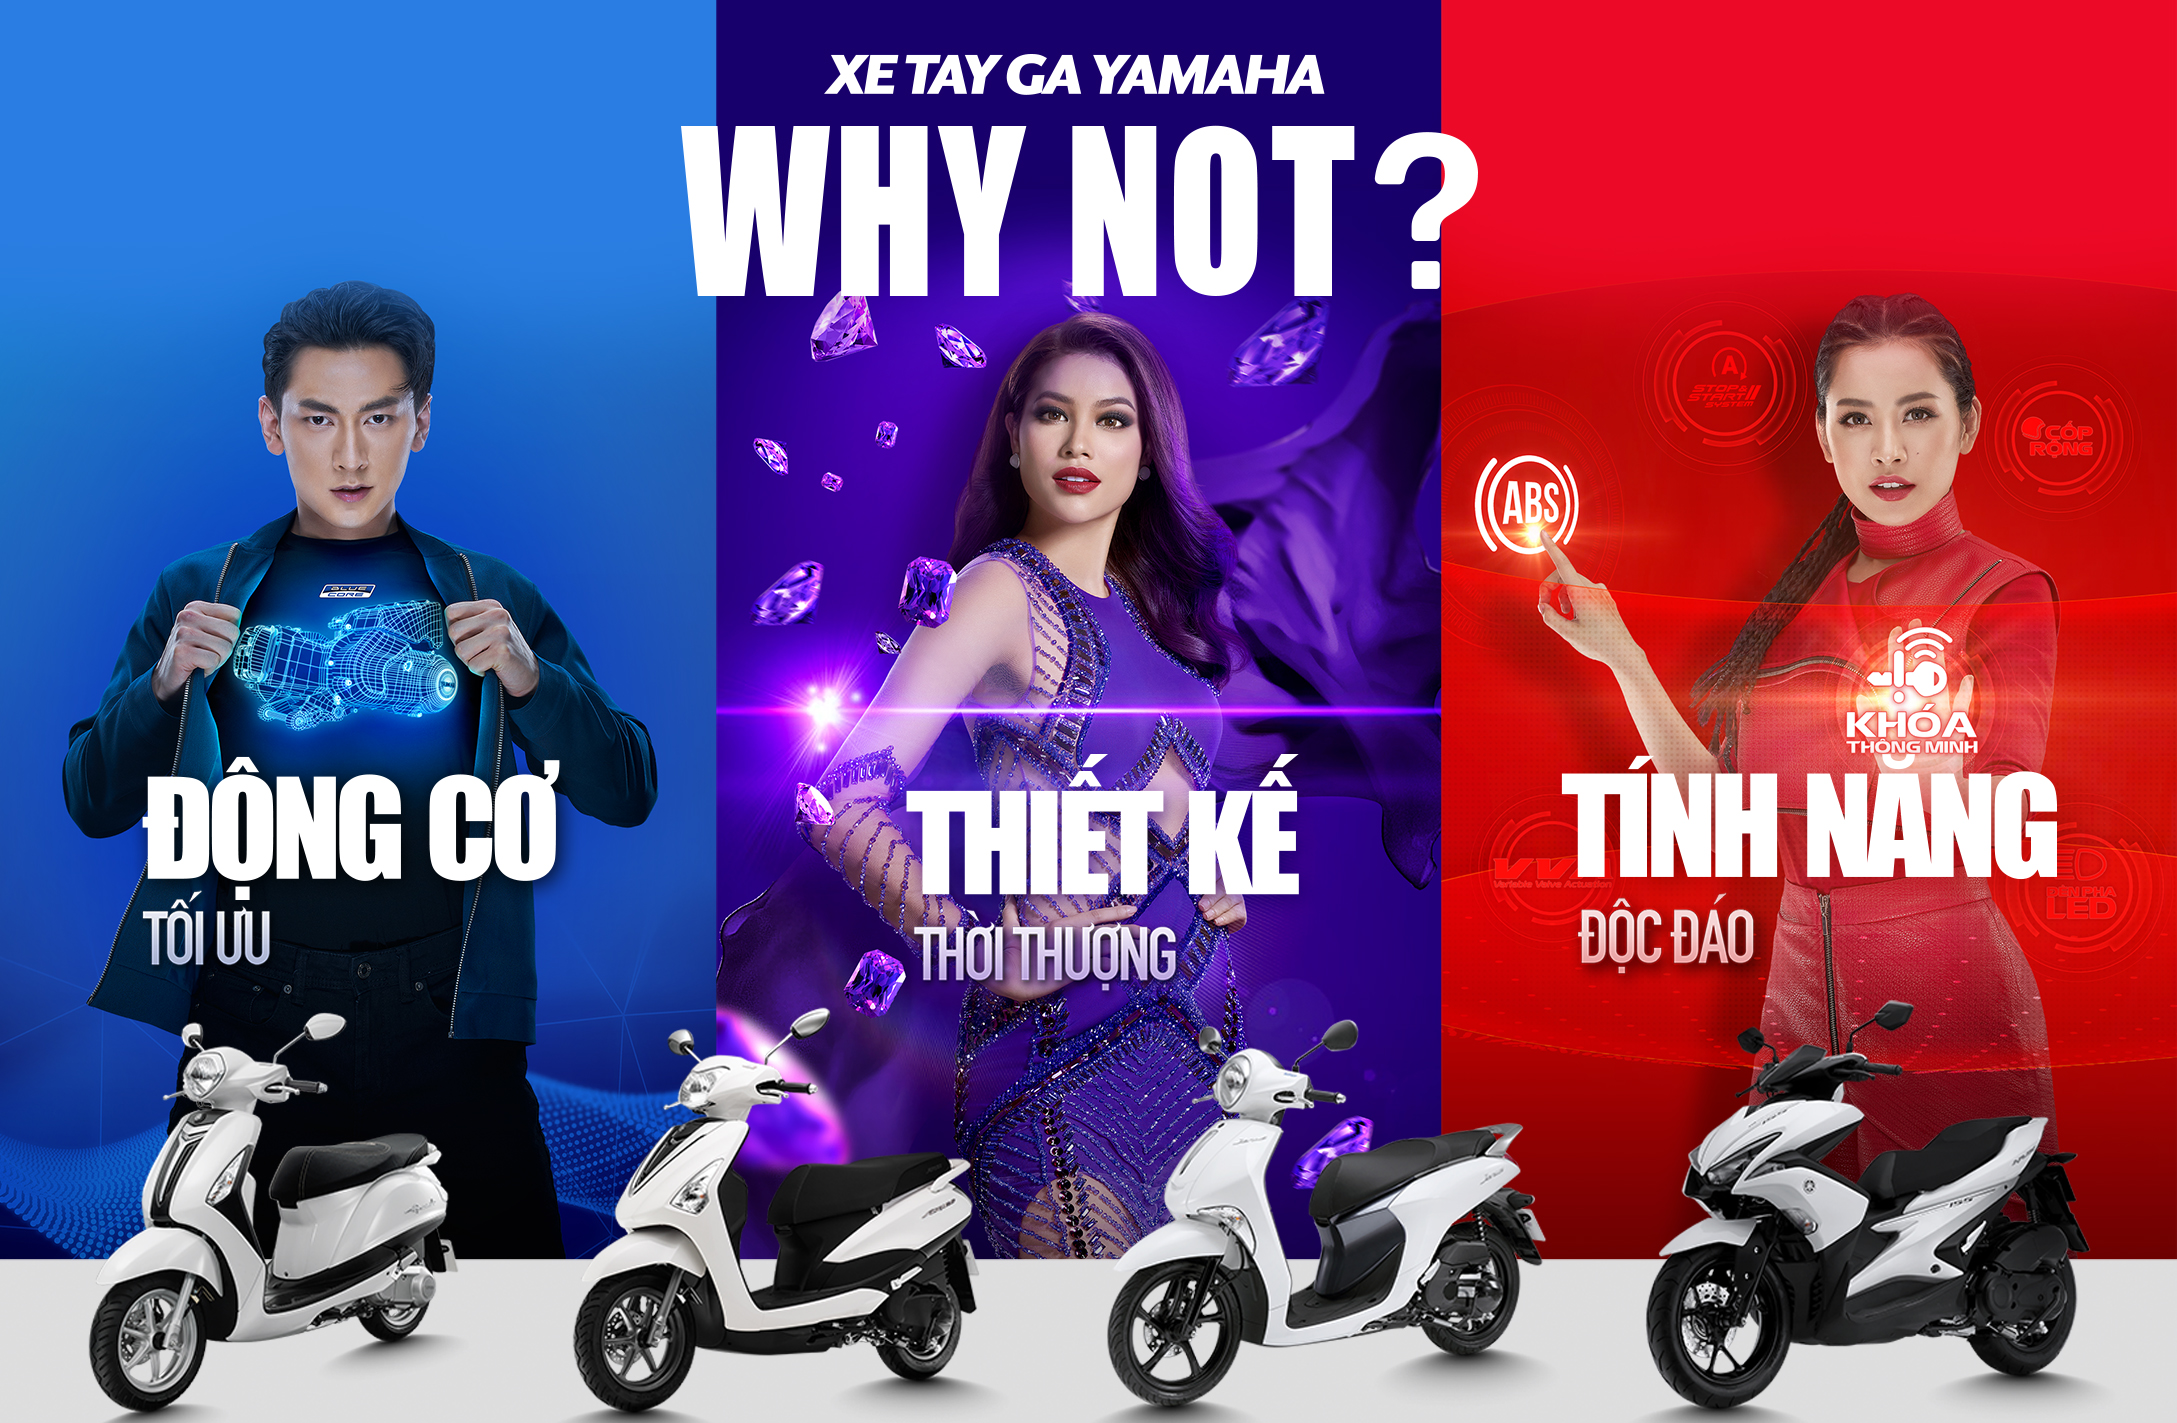 CHIẾN DỊCH WHY NOT YAMAHA VIET NAM